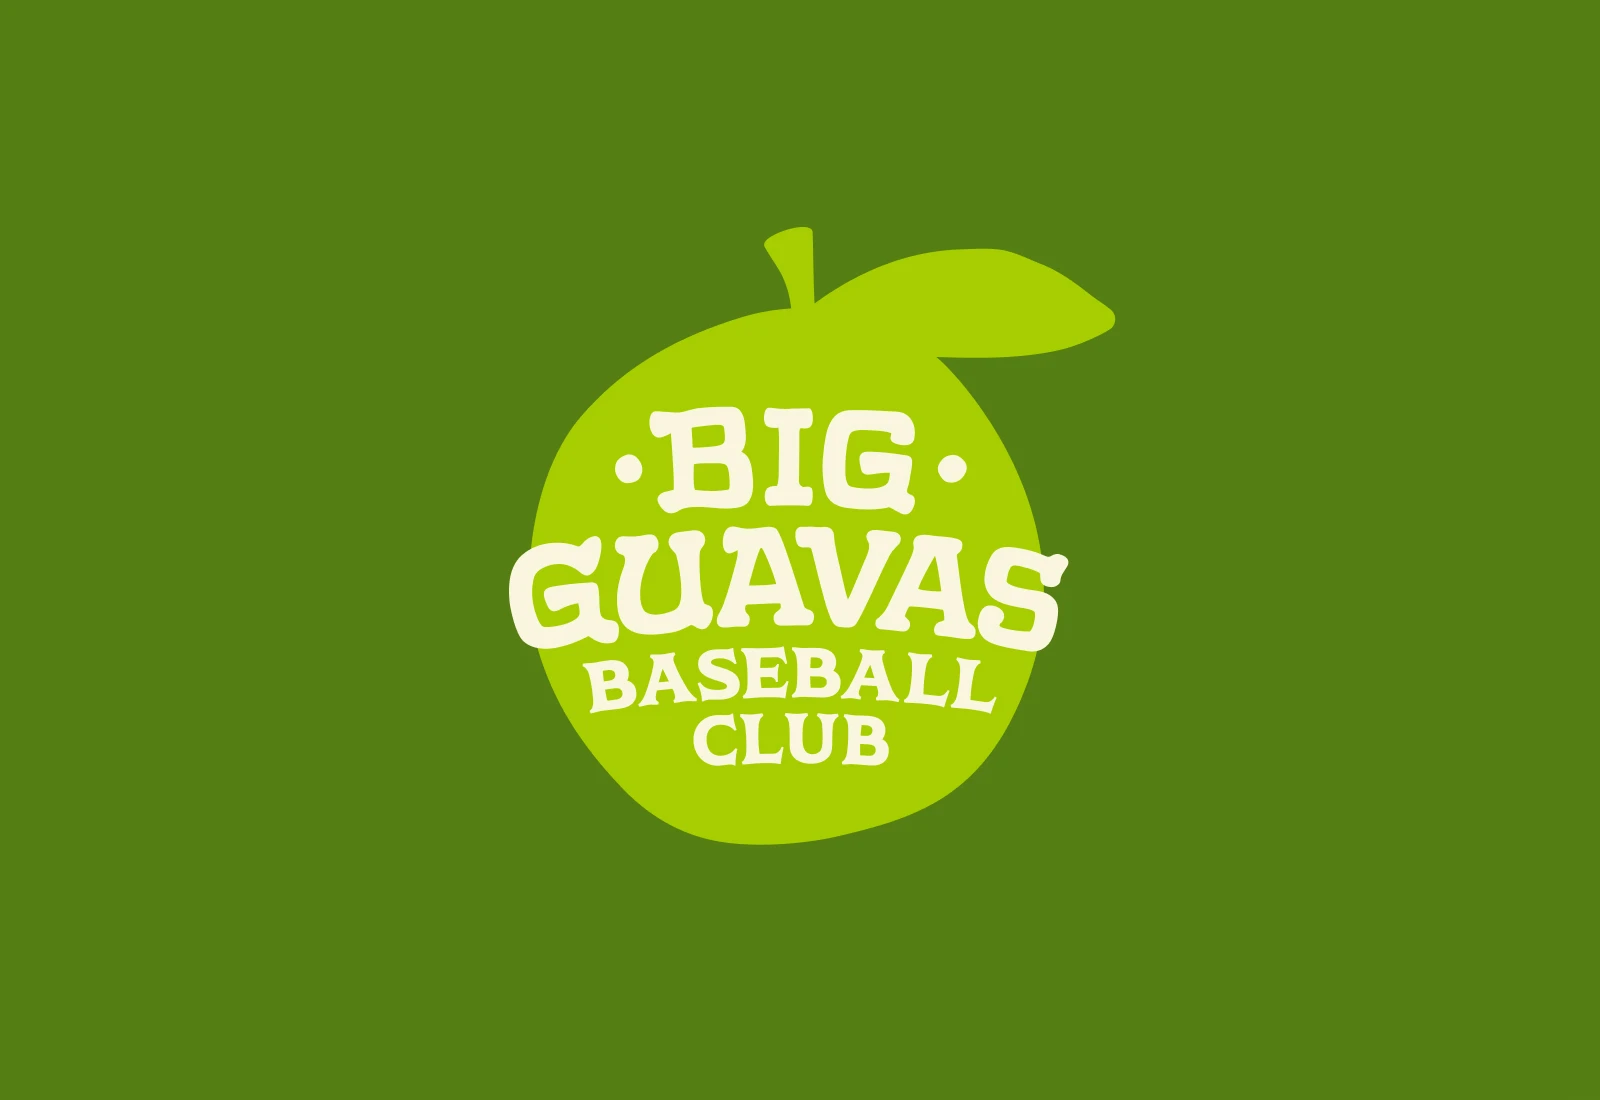 SIlhouette of a green guava with the Big Guavas hand lettered logo overlayed.